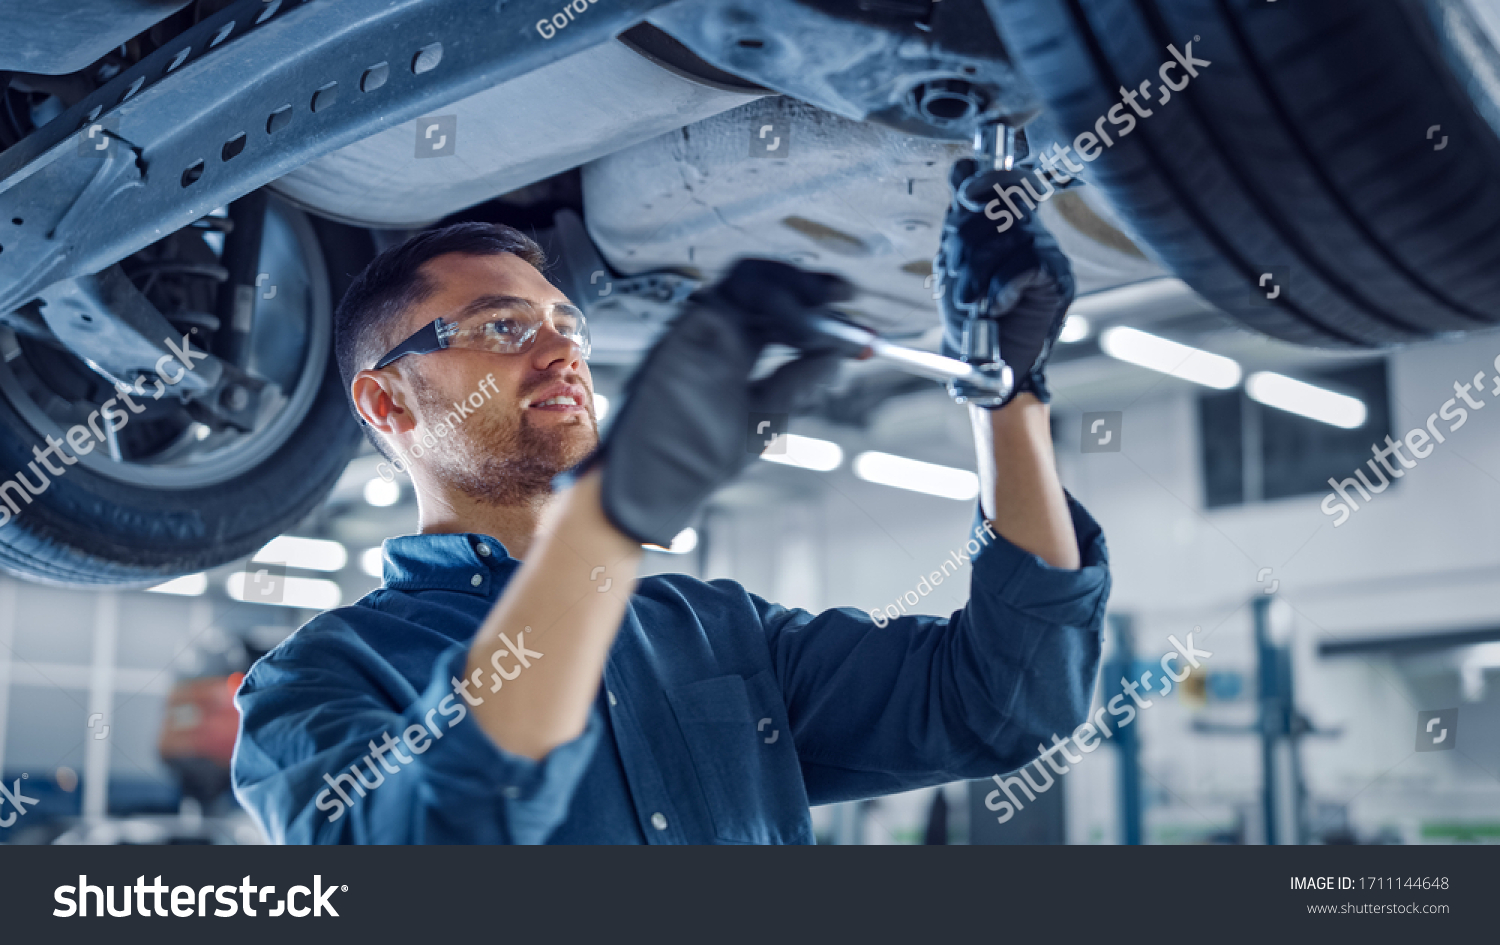 Portrait Shot of a Handsome Mechanic Working on a Vehicle in a Car Service. Professional Repairman is Wearing Gloves and Using a Ratchet Underneath the Car. Modern Clean Workshop. #1711144648